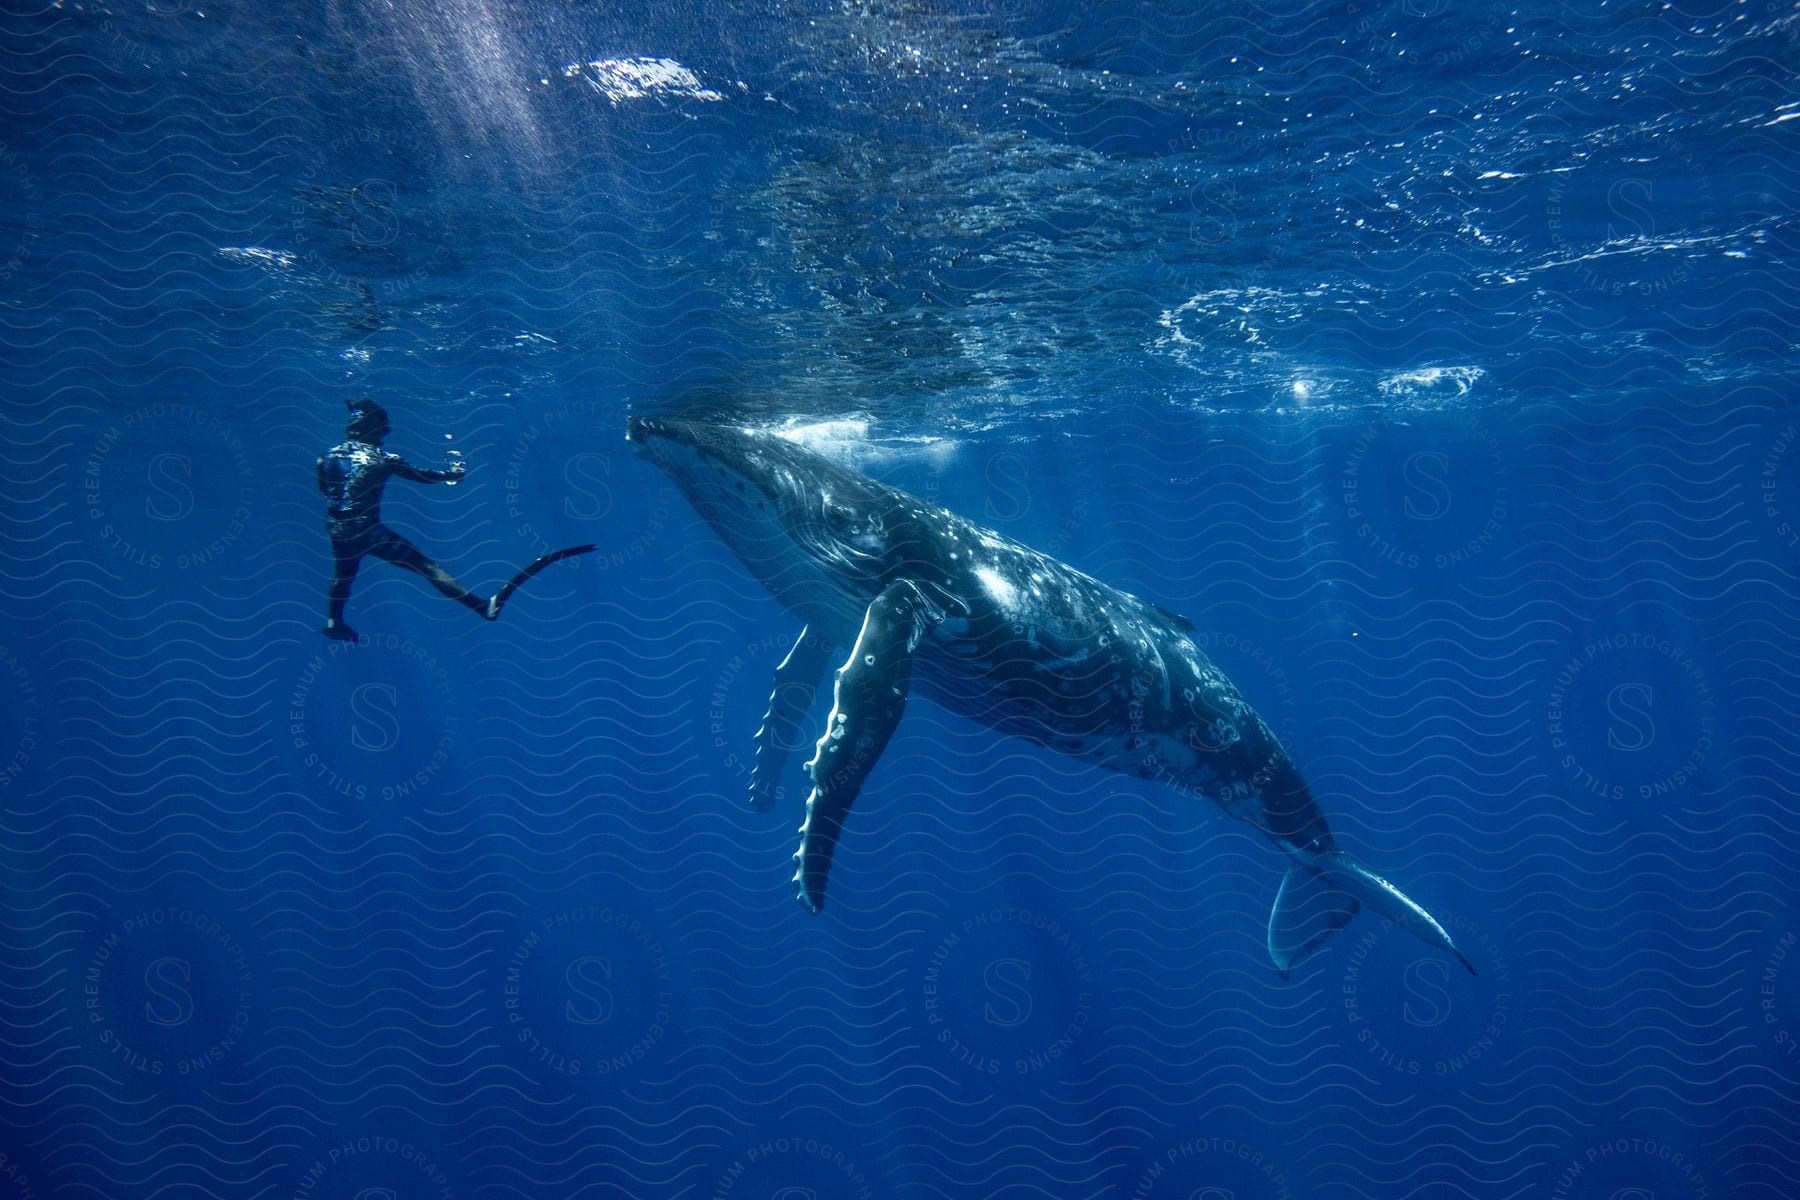 A diver swimming with a whale in the ocean.